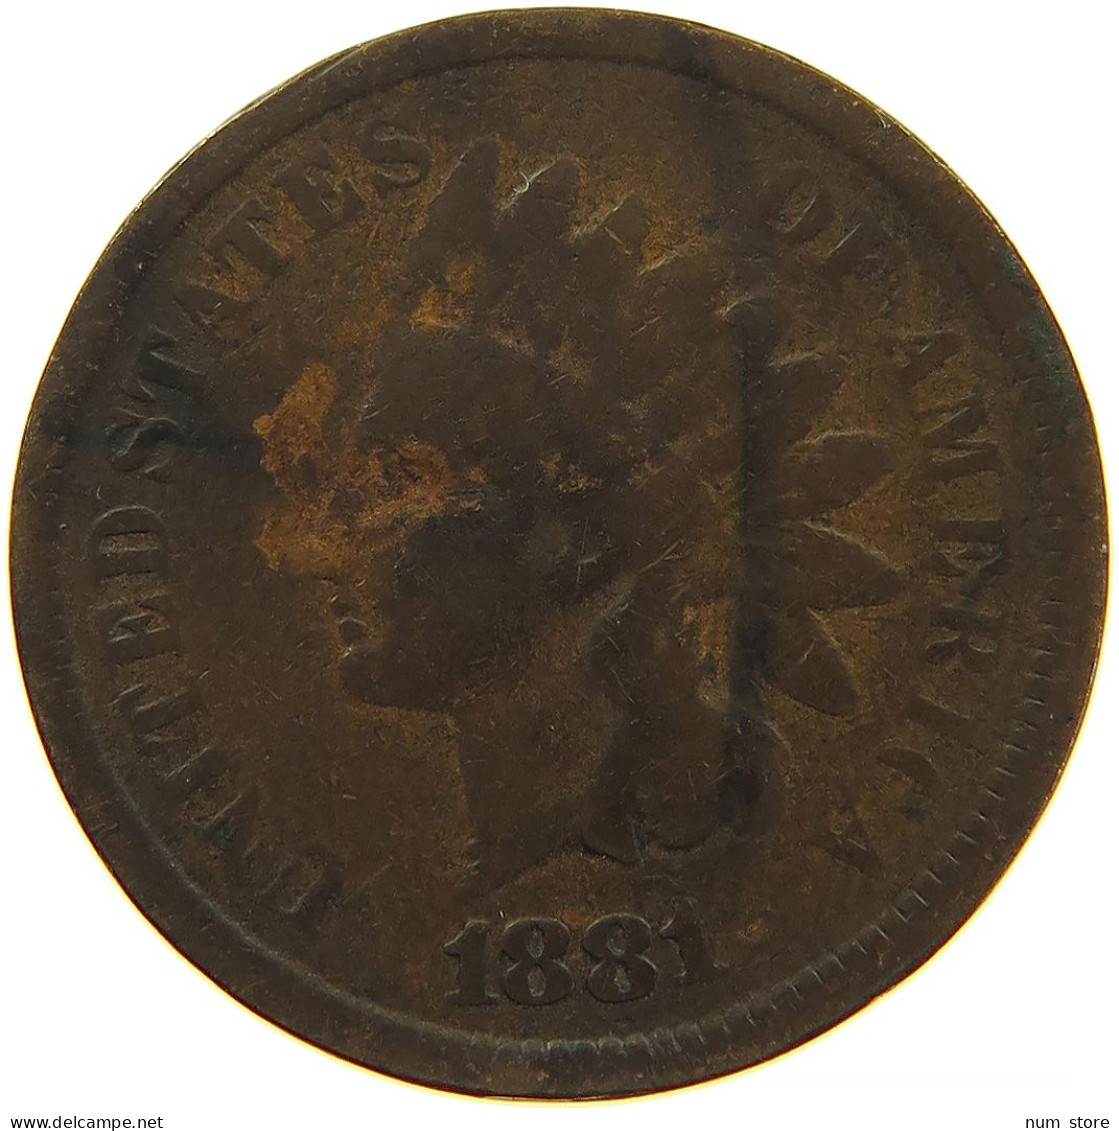 UNITED STATES OF AMERICA CENT 1881 INDIAN HEAD #s091 0389 - 1859-1909: Indian Head